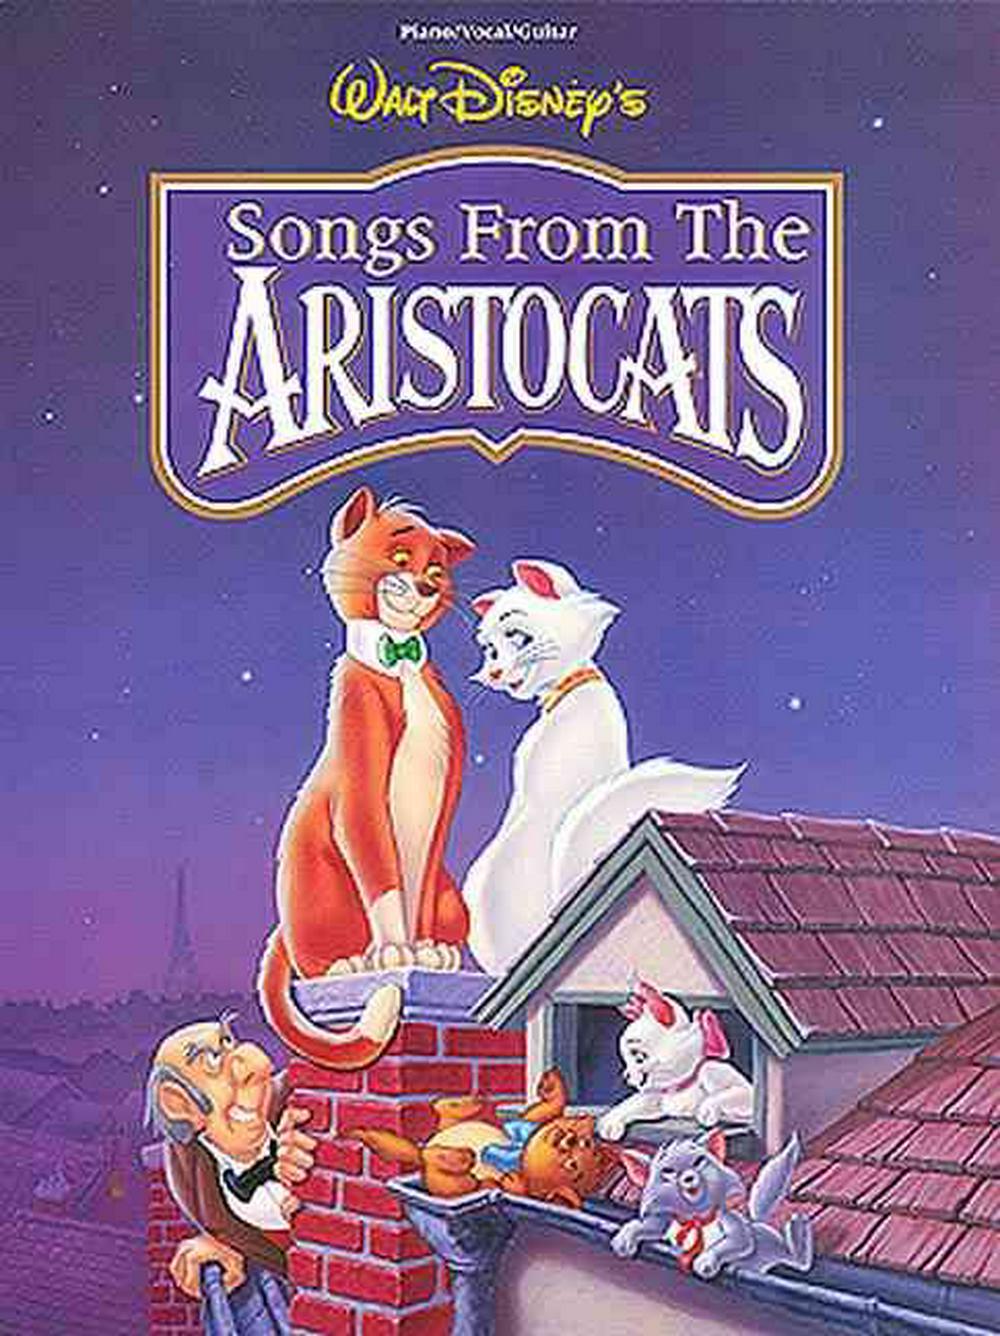 The Aristocats Title Logo - The Aristocats by Walt Disney Productions, Paperback, 9780793566884